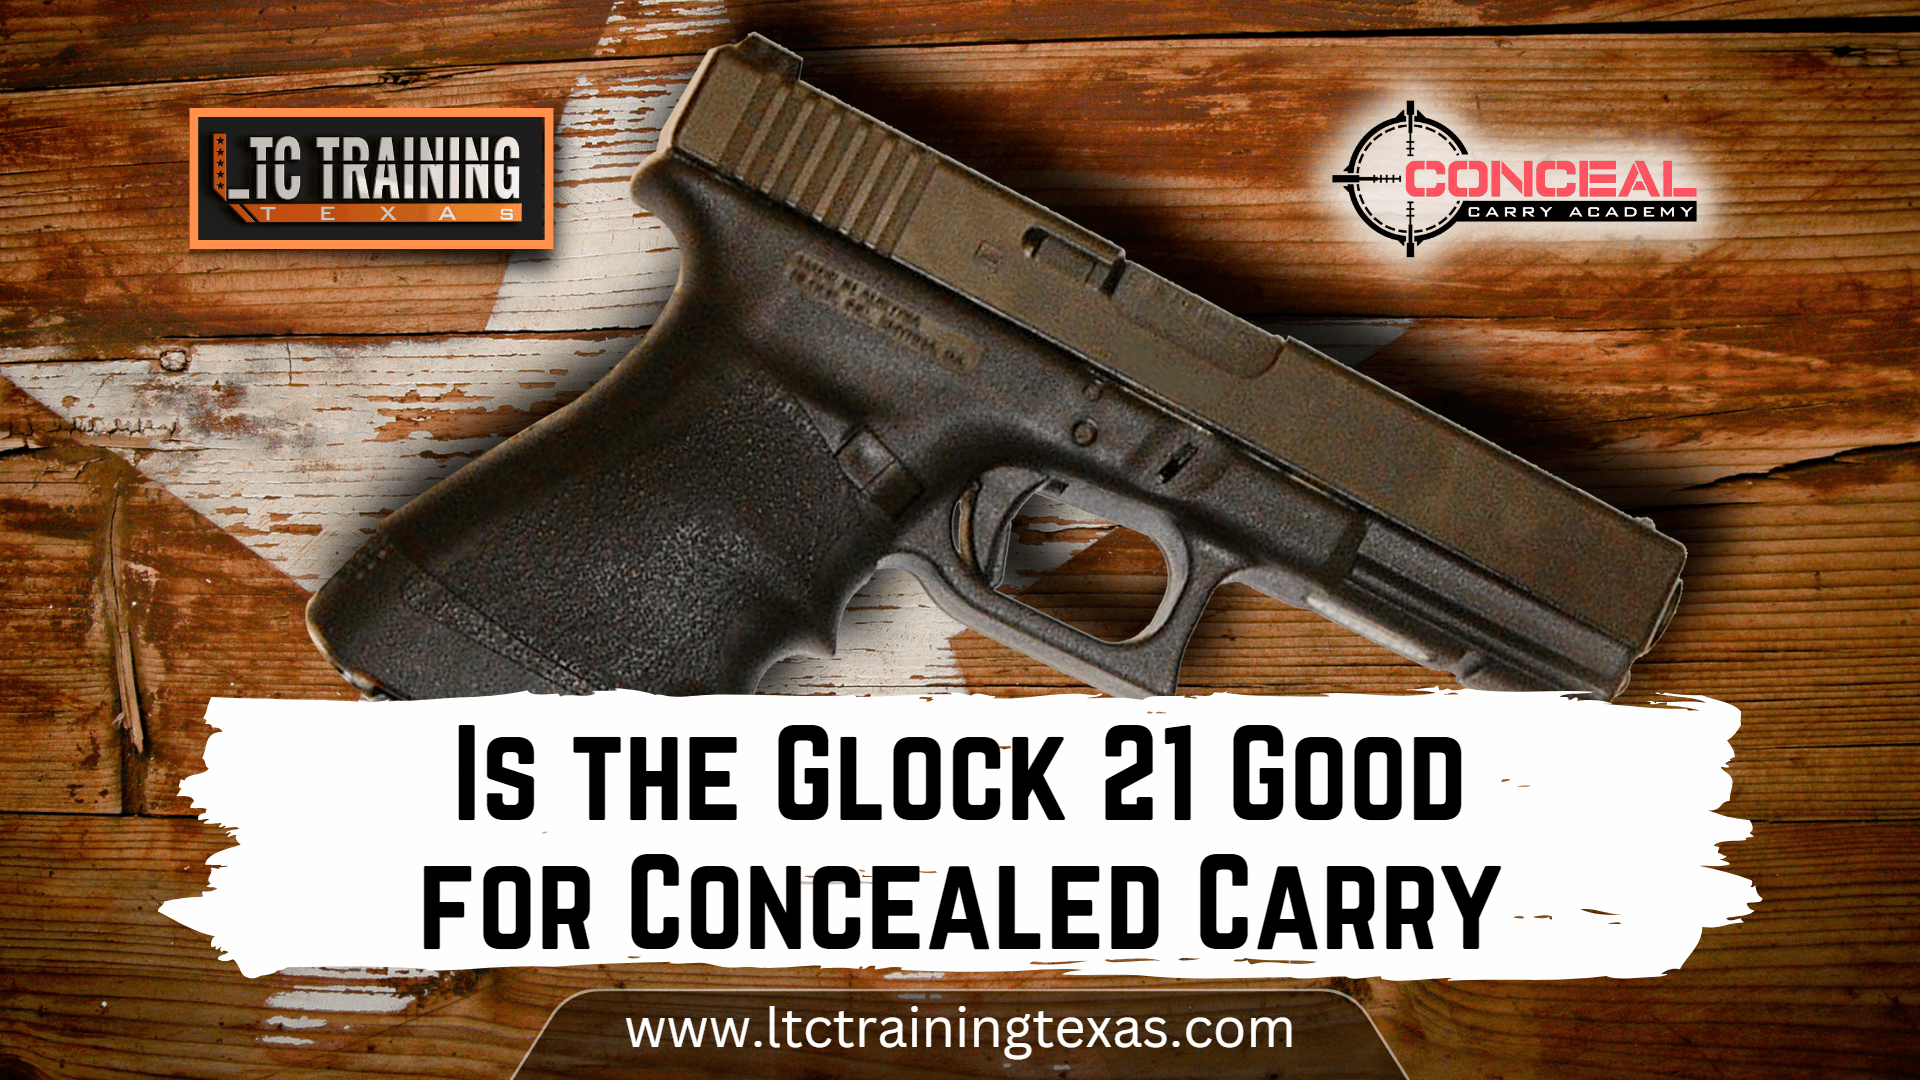 Is the Glock 21 Good for Concealed Carry?